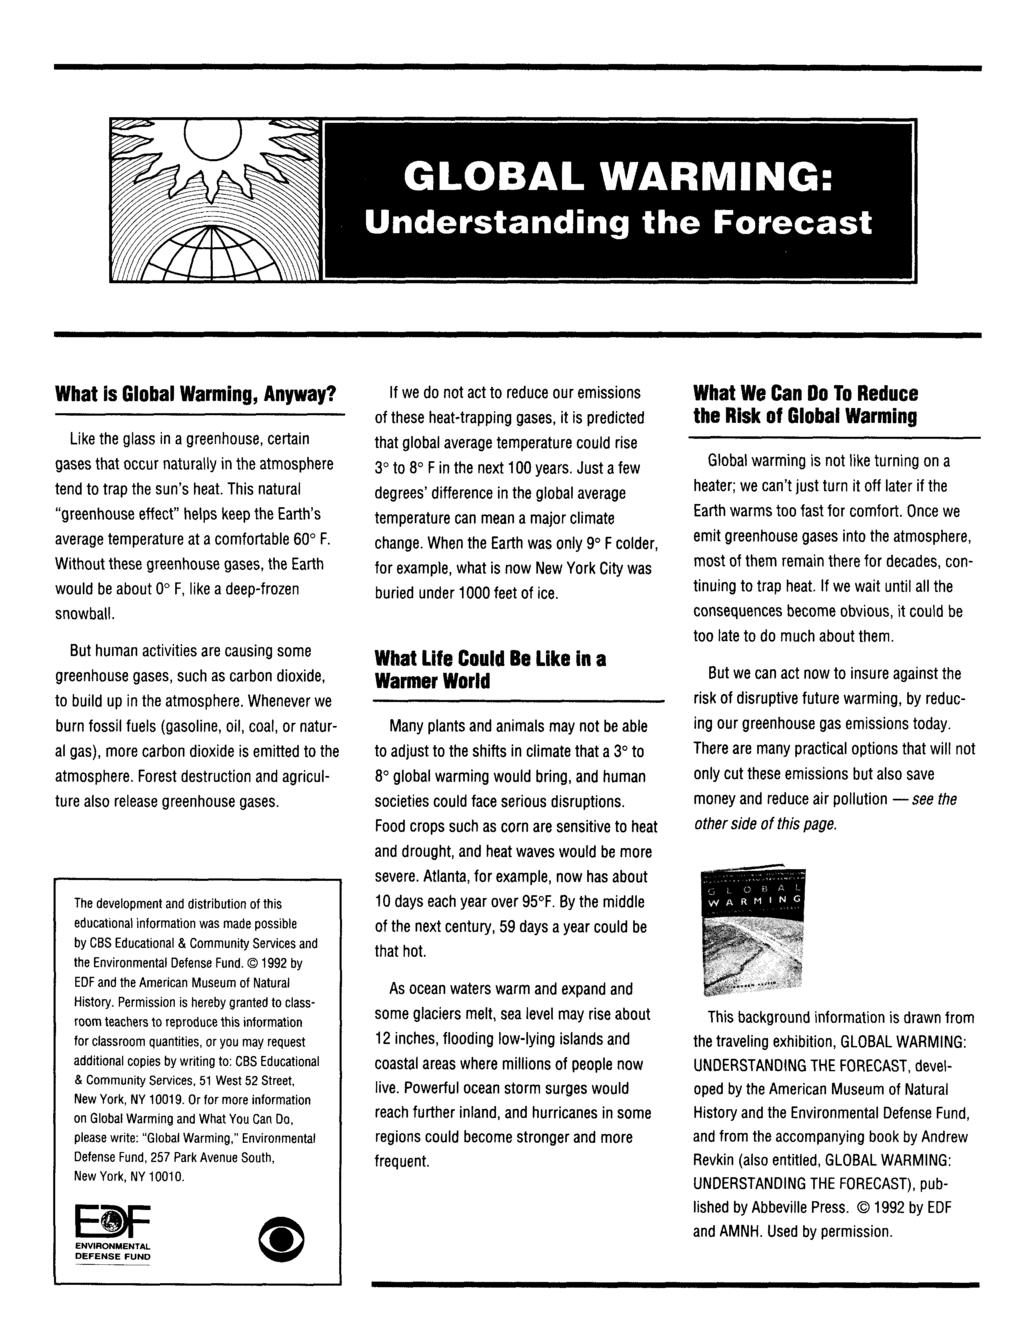 What is Global Warming, Anyway? Like the glass in a greenhouse, certain gases that occur naturally in the atmosphere tend to trap the sun's heat.